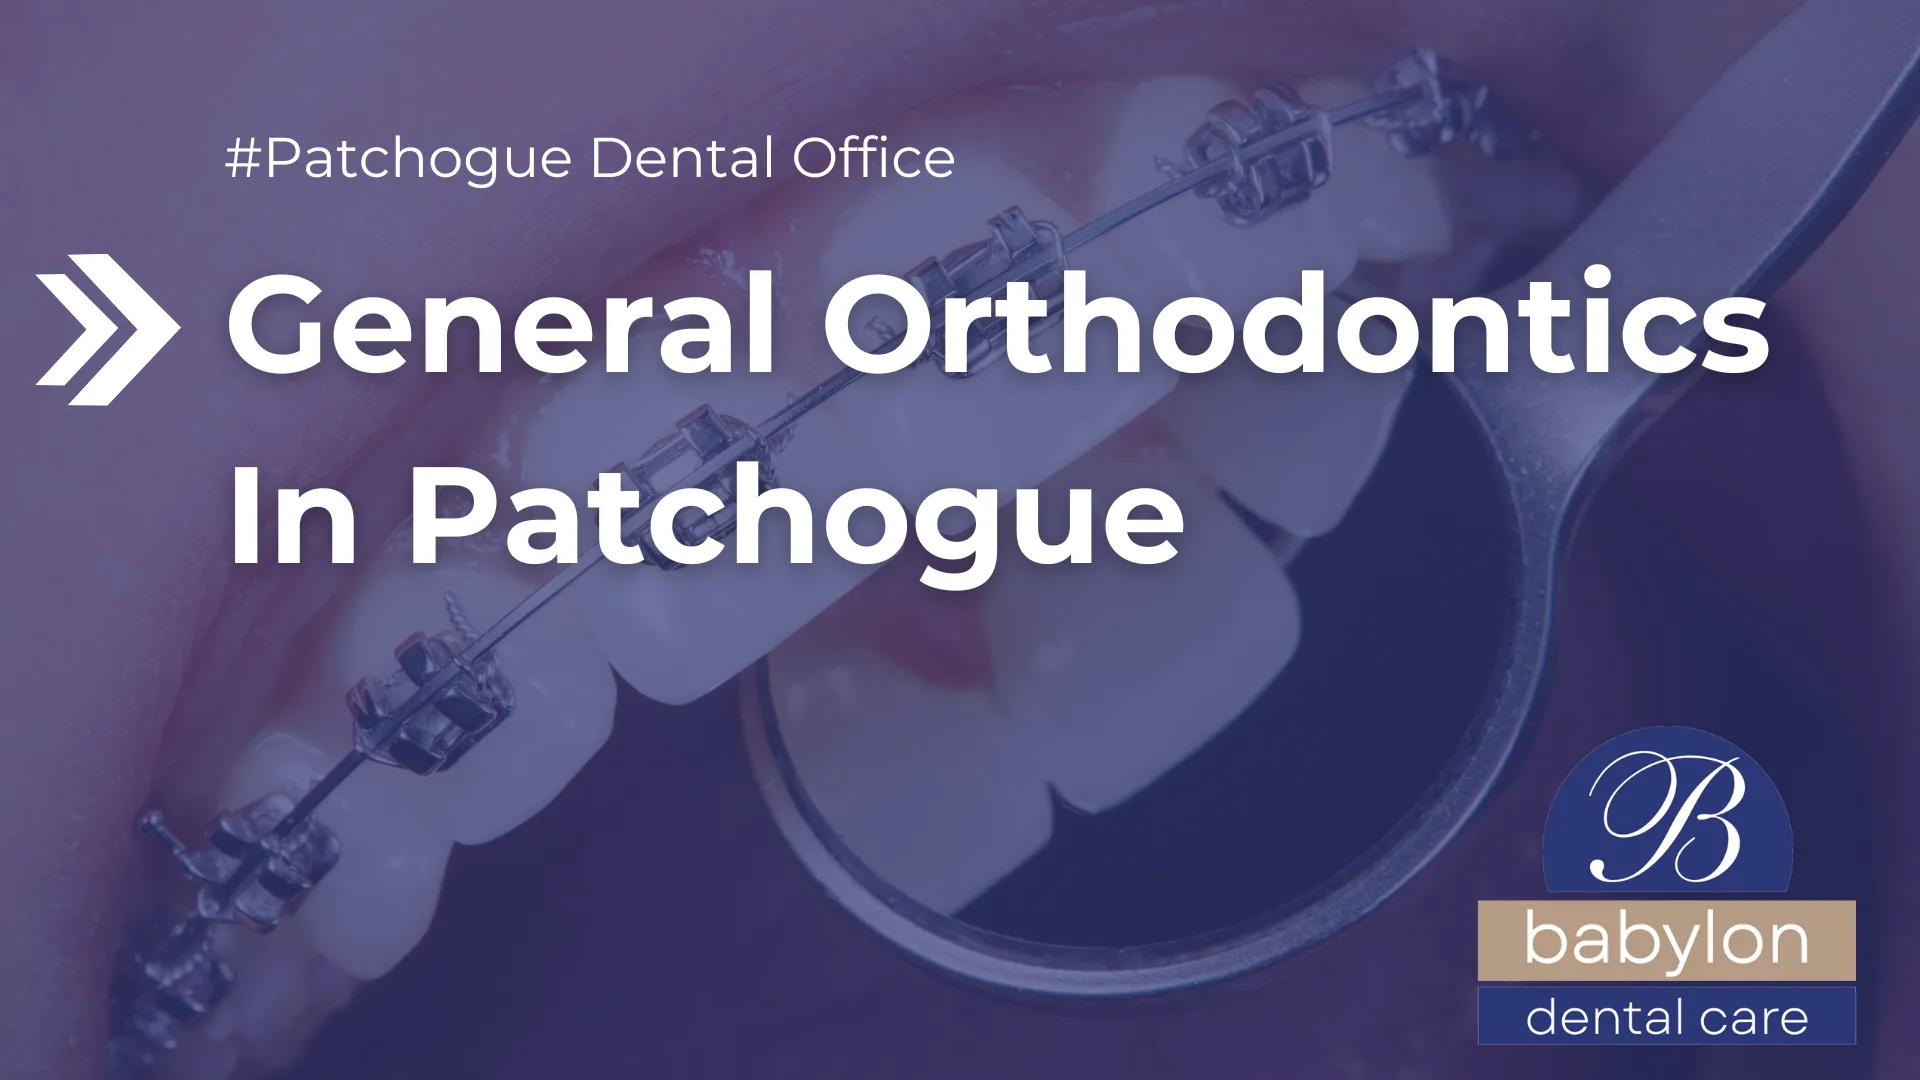 General Orthodontics In Patchogue Image - new logo